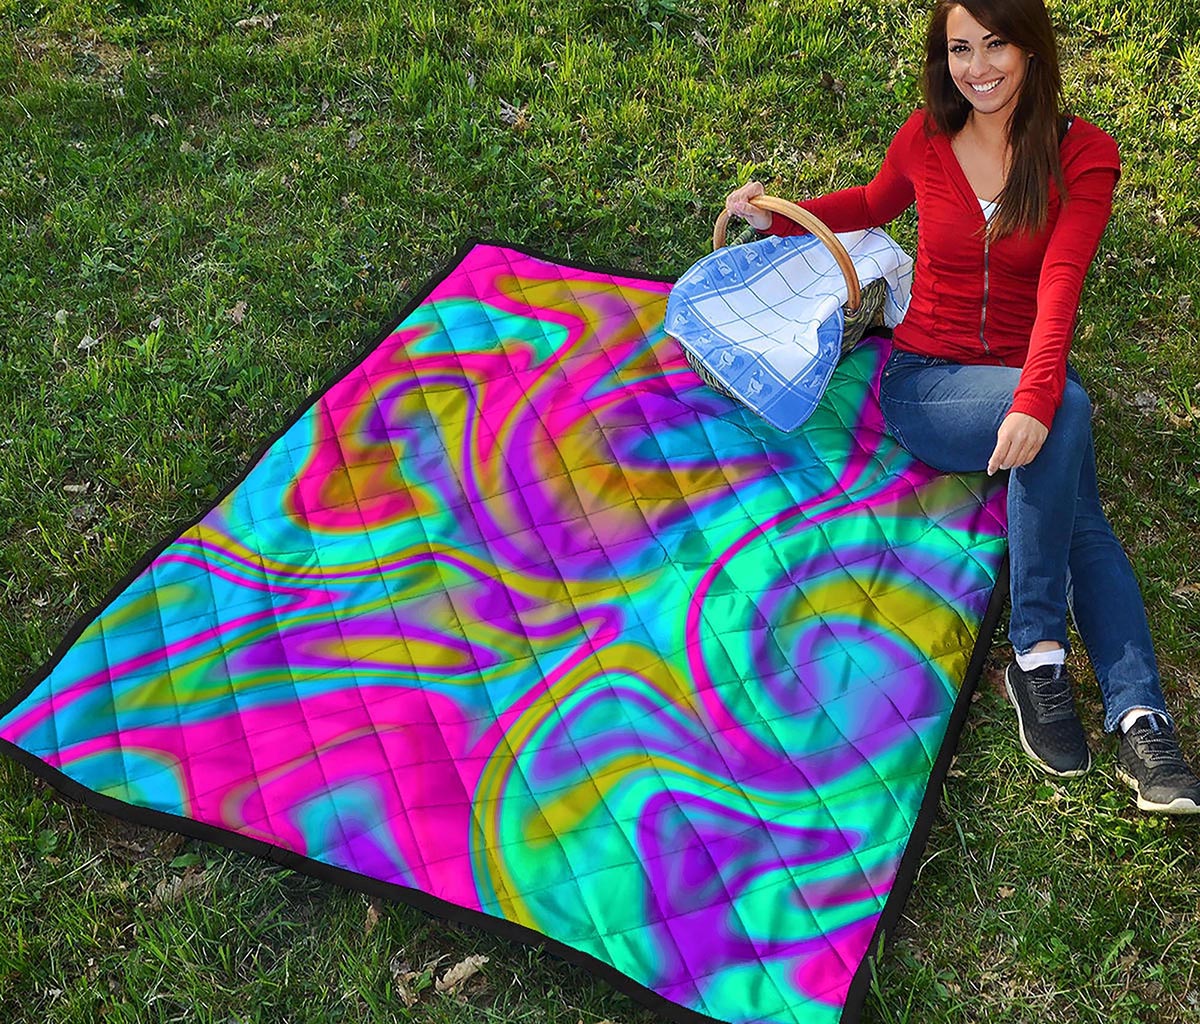 Neon Psychedelic Trippy Print Quilt